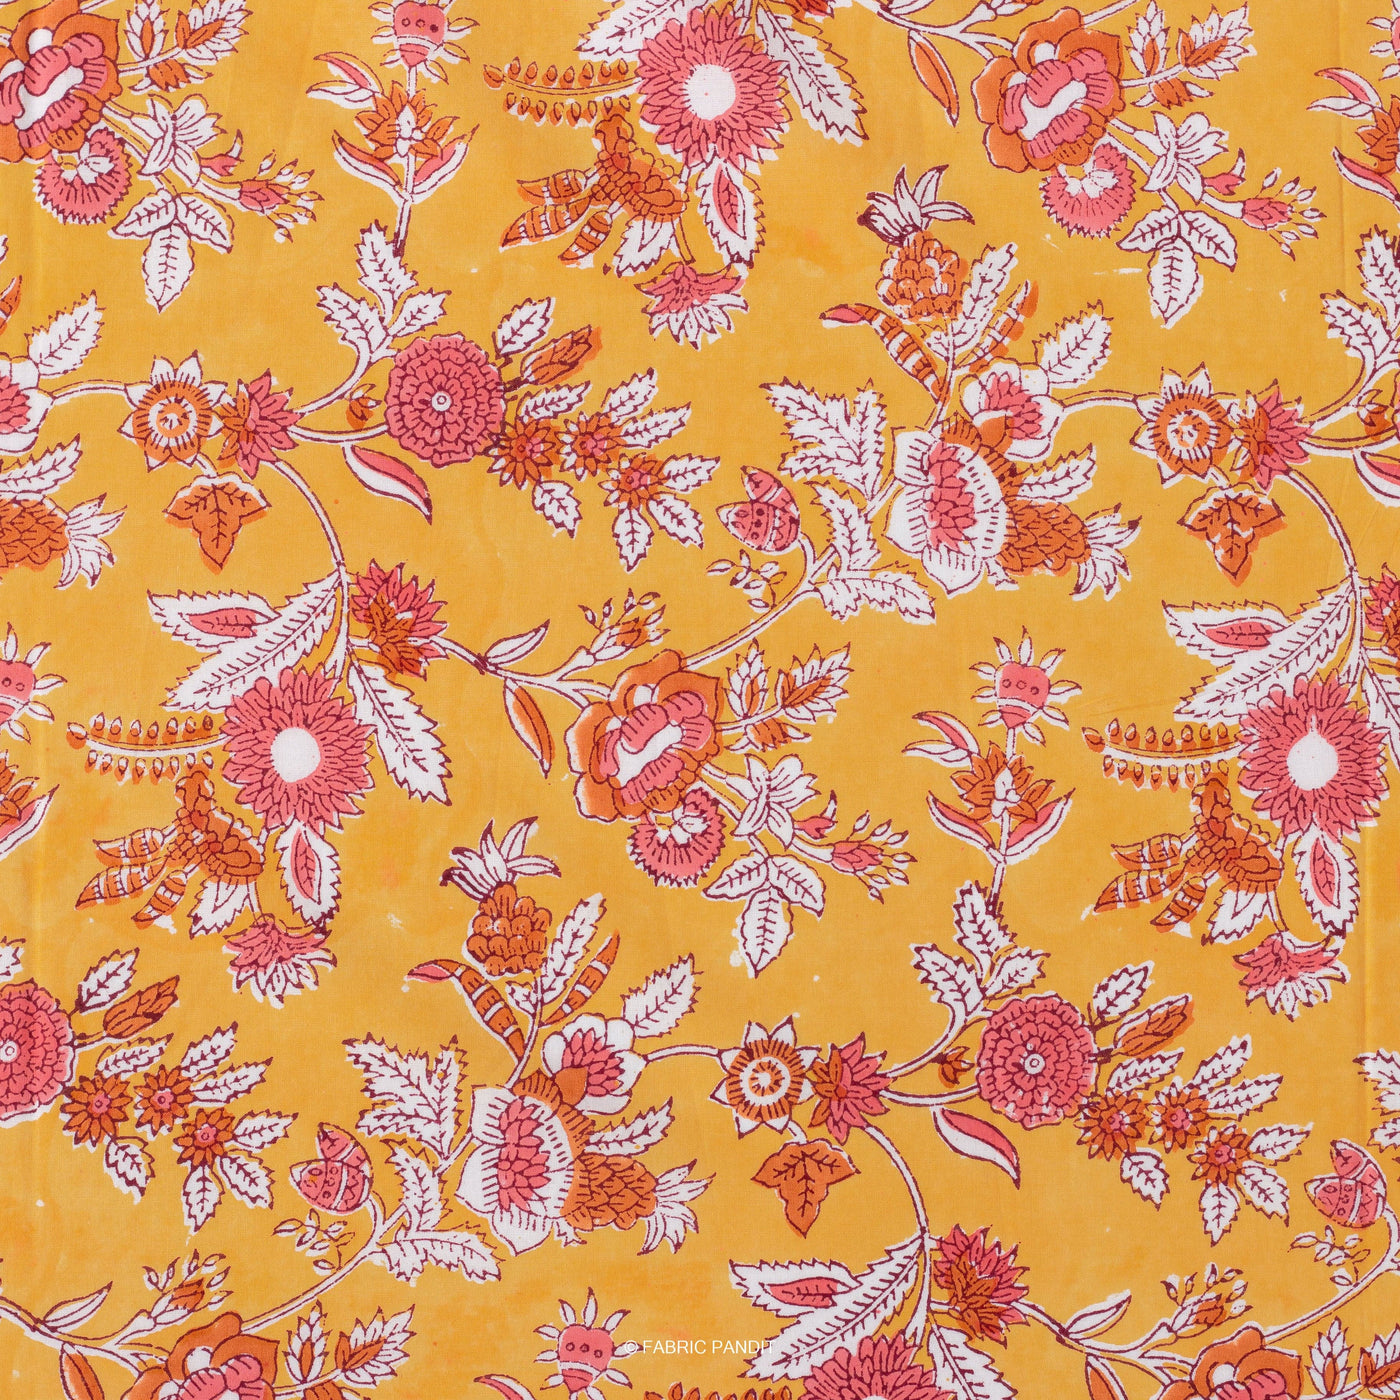 Fabric Pandit Fabric Mango Yellow & Pink Floral Vines All Over Screen Printed Pure Cotton Cambric Fabric (Width 44 Inches)